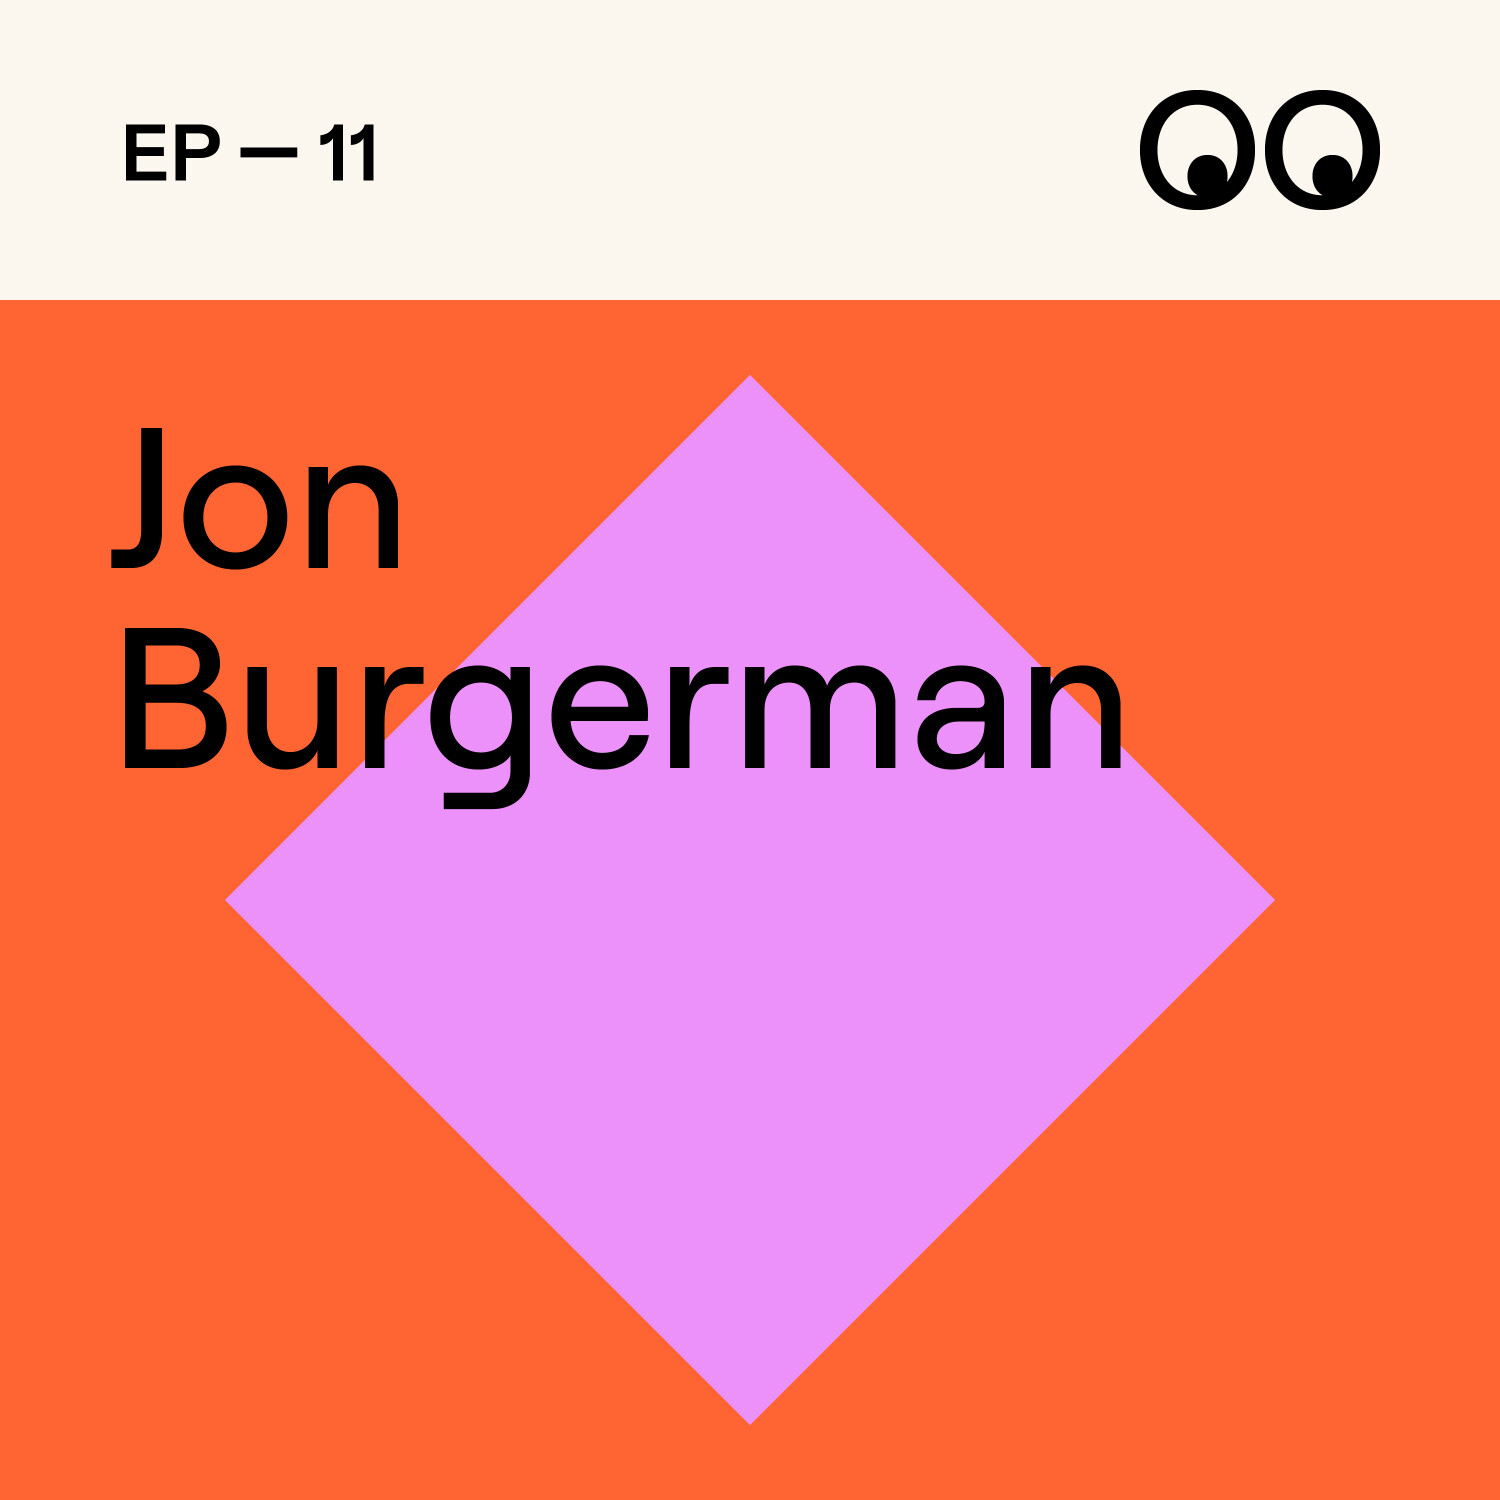 Surviving as a funny introvert in New York City, with Jon Burgerman